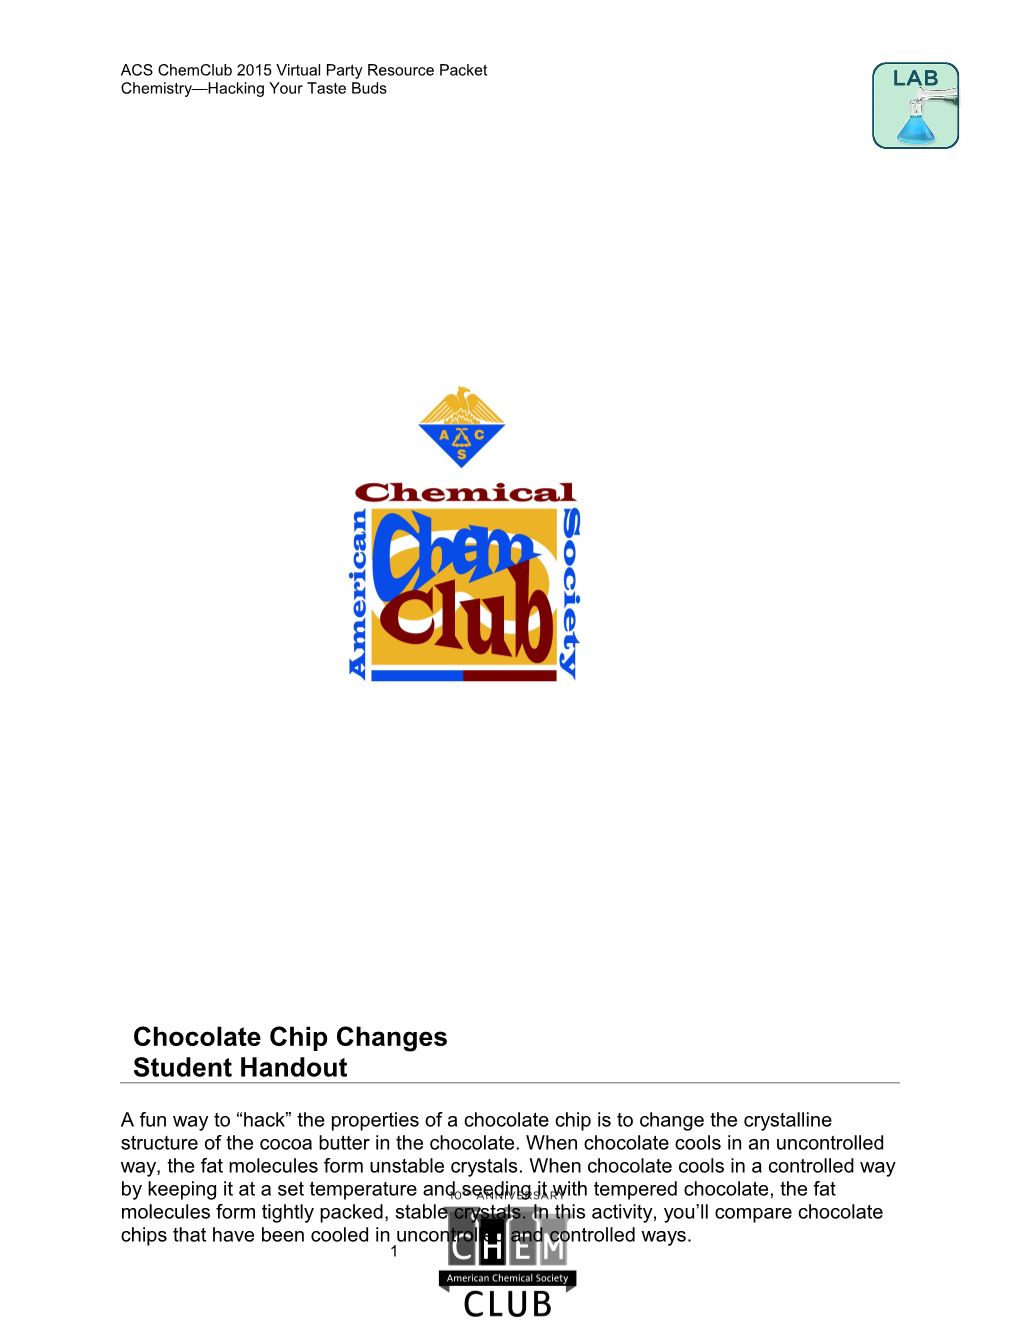 ACS Chemclub 2015 Virtual Party Resource Packet